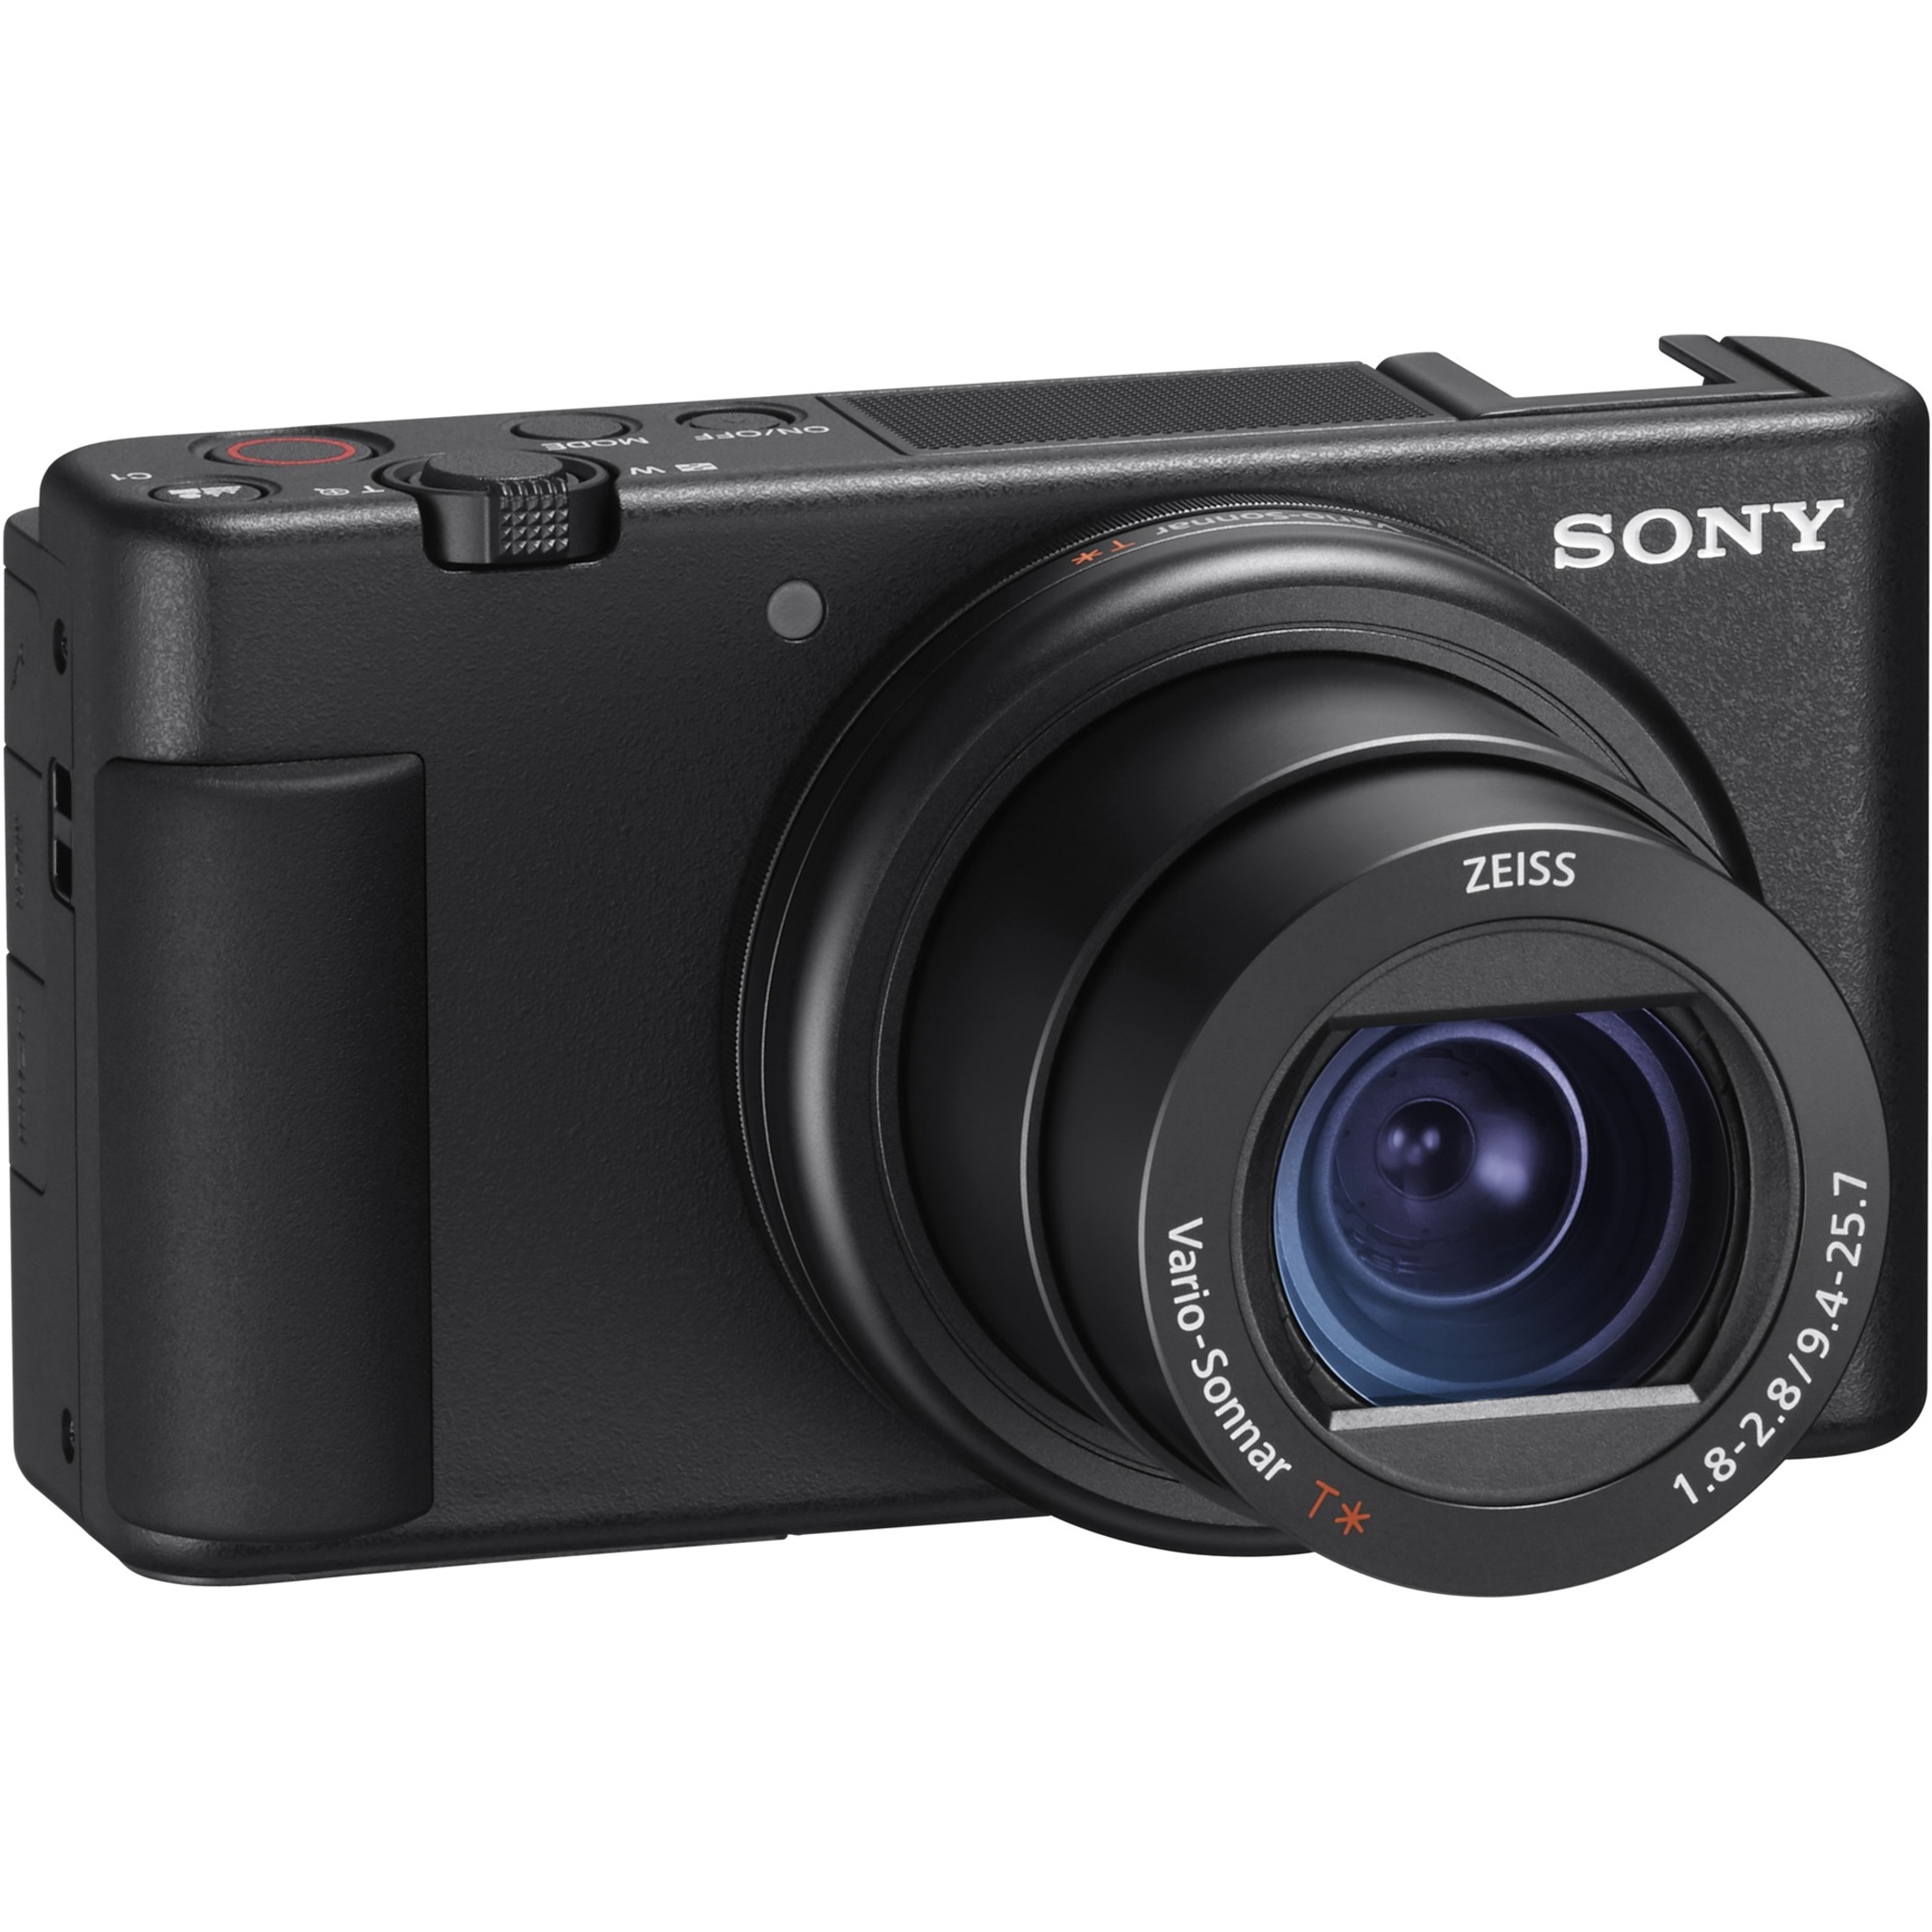 Sony ZV-1 20.1 Megapixel Compact Camera, Black - image 10 of 29